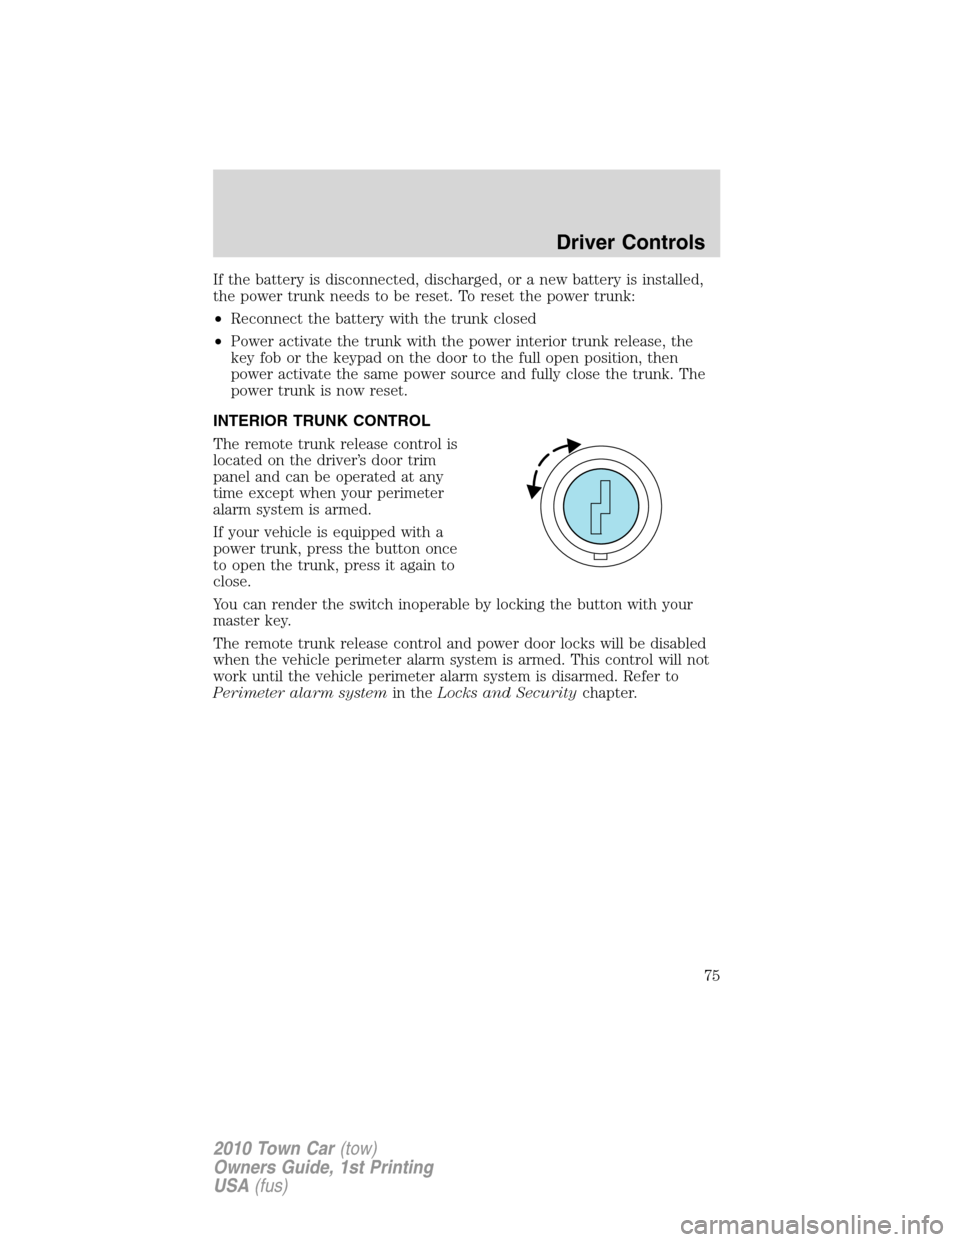 LINCOLN TOWN CAR 2010 Manual PDF If the battery is disconnected, discharged, or a new battery is installed,
the power trunk needs to be reset. To reset the power trunk:
•Reconnect the battery with the trunk closed
•Power activate